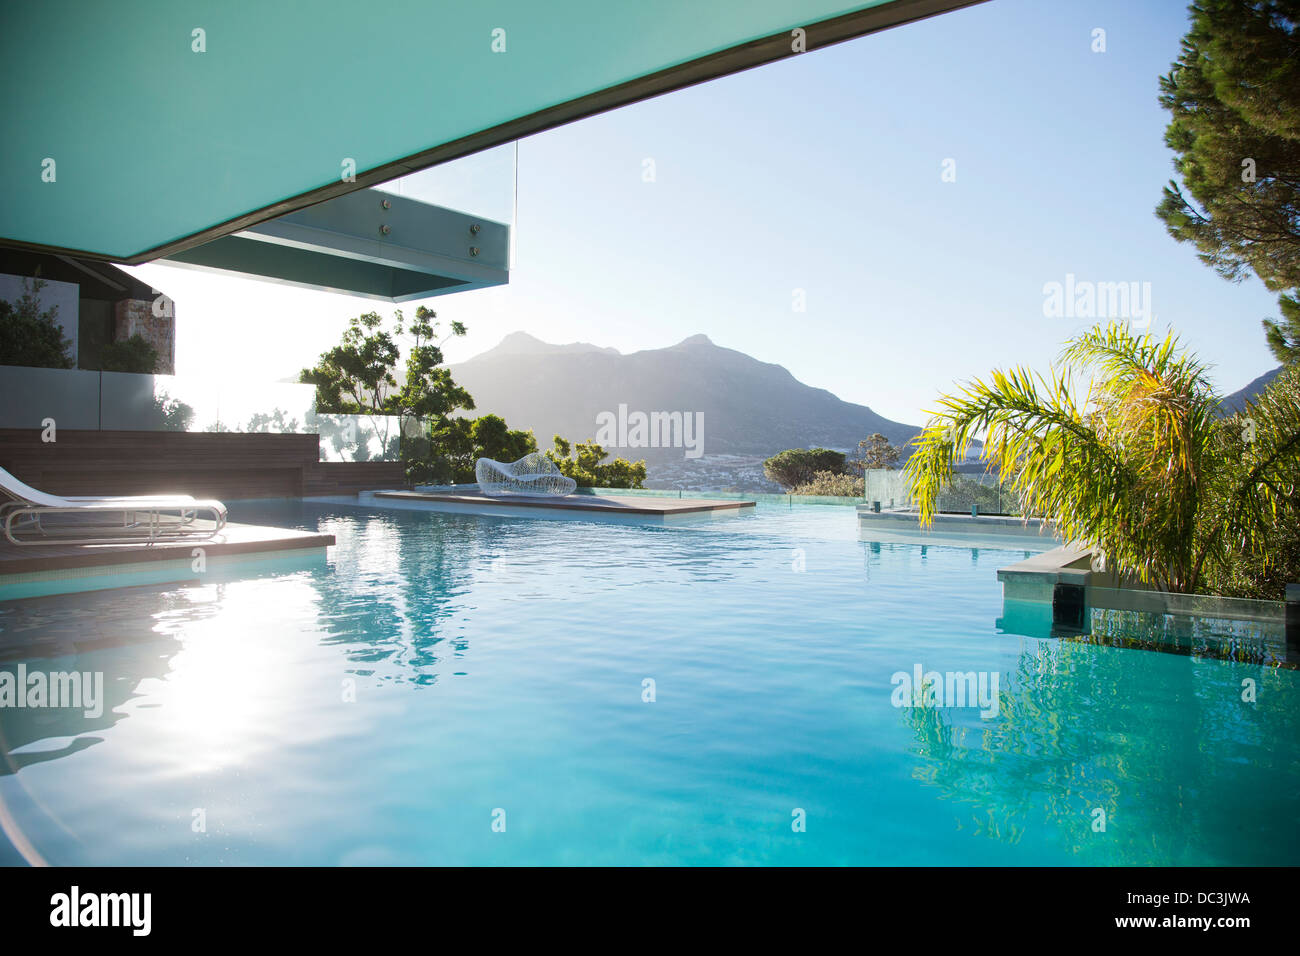 Luxury swimming pool with mountain view Stock Photo